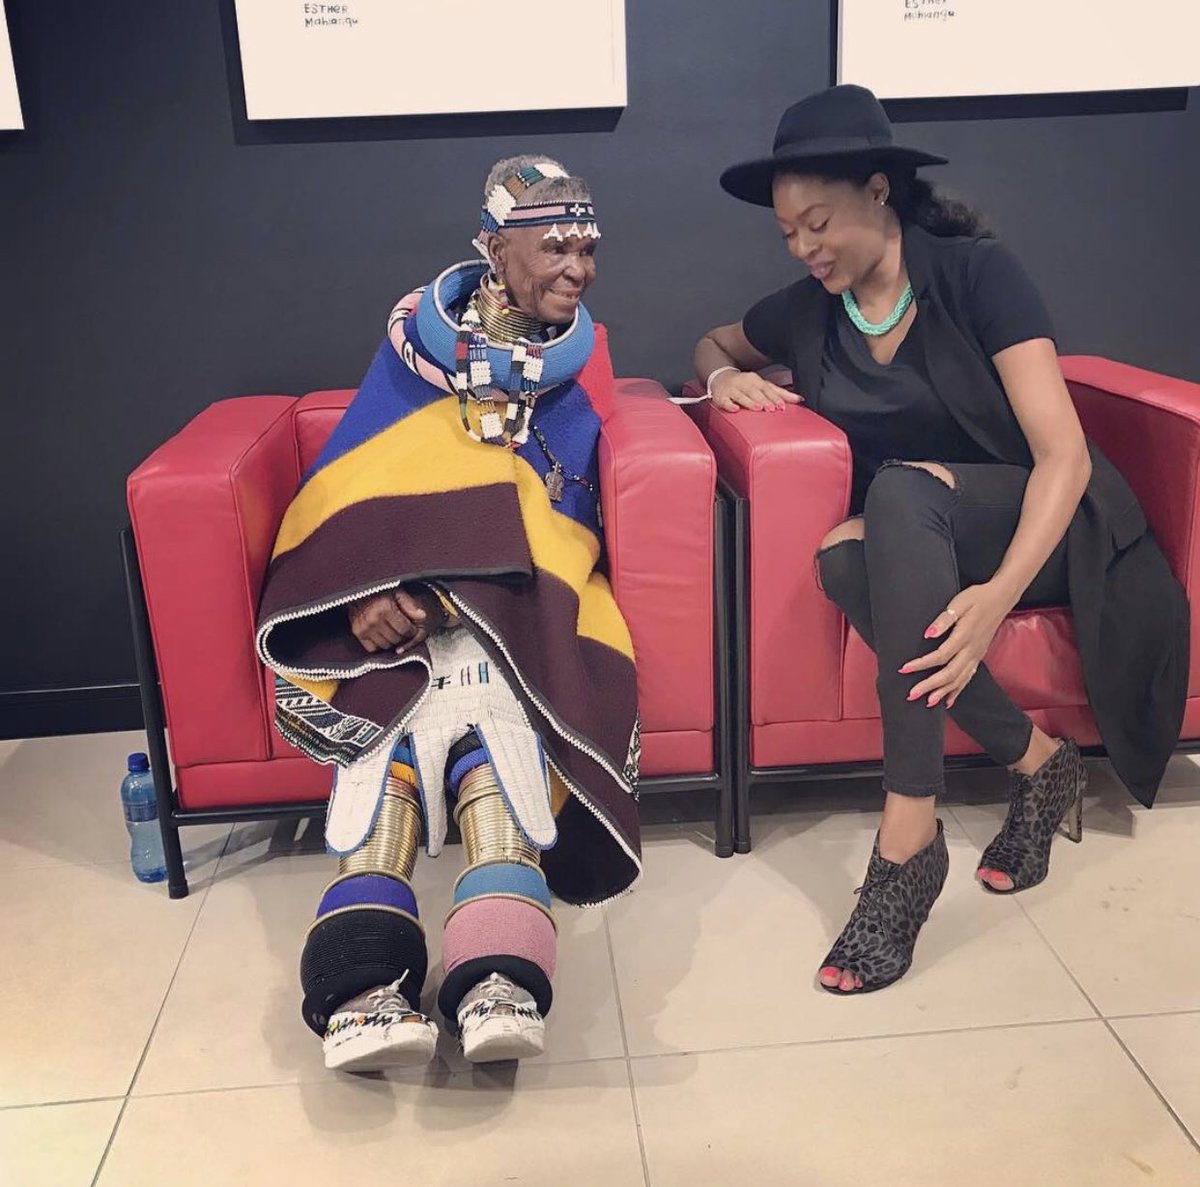 Once upon a time, I had an organic and magical encounter with a LEGENDARY woman. This is why I miss SA 🇿🇦❤️ #EstherMahlangu